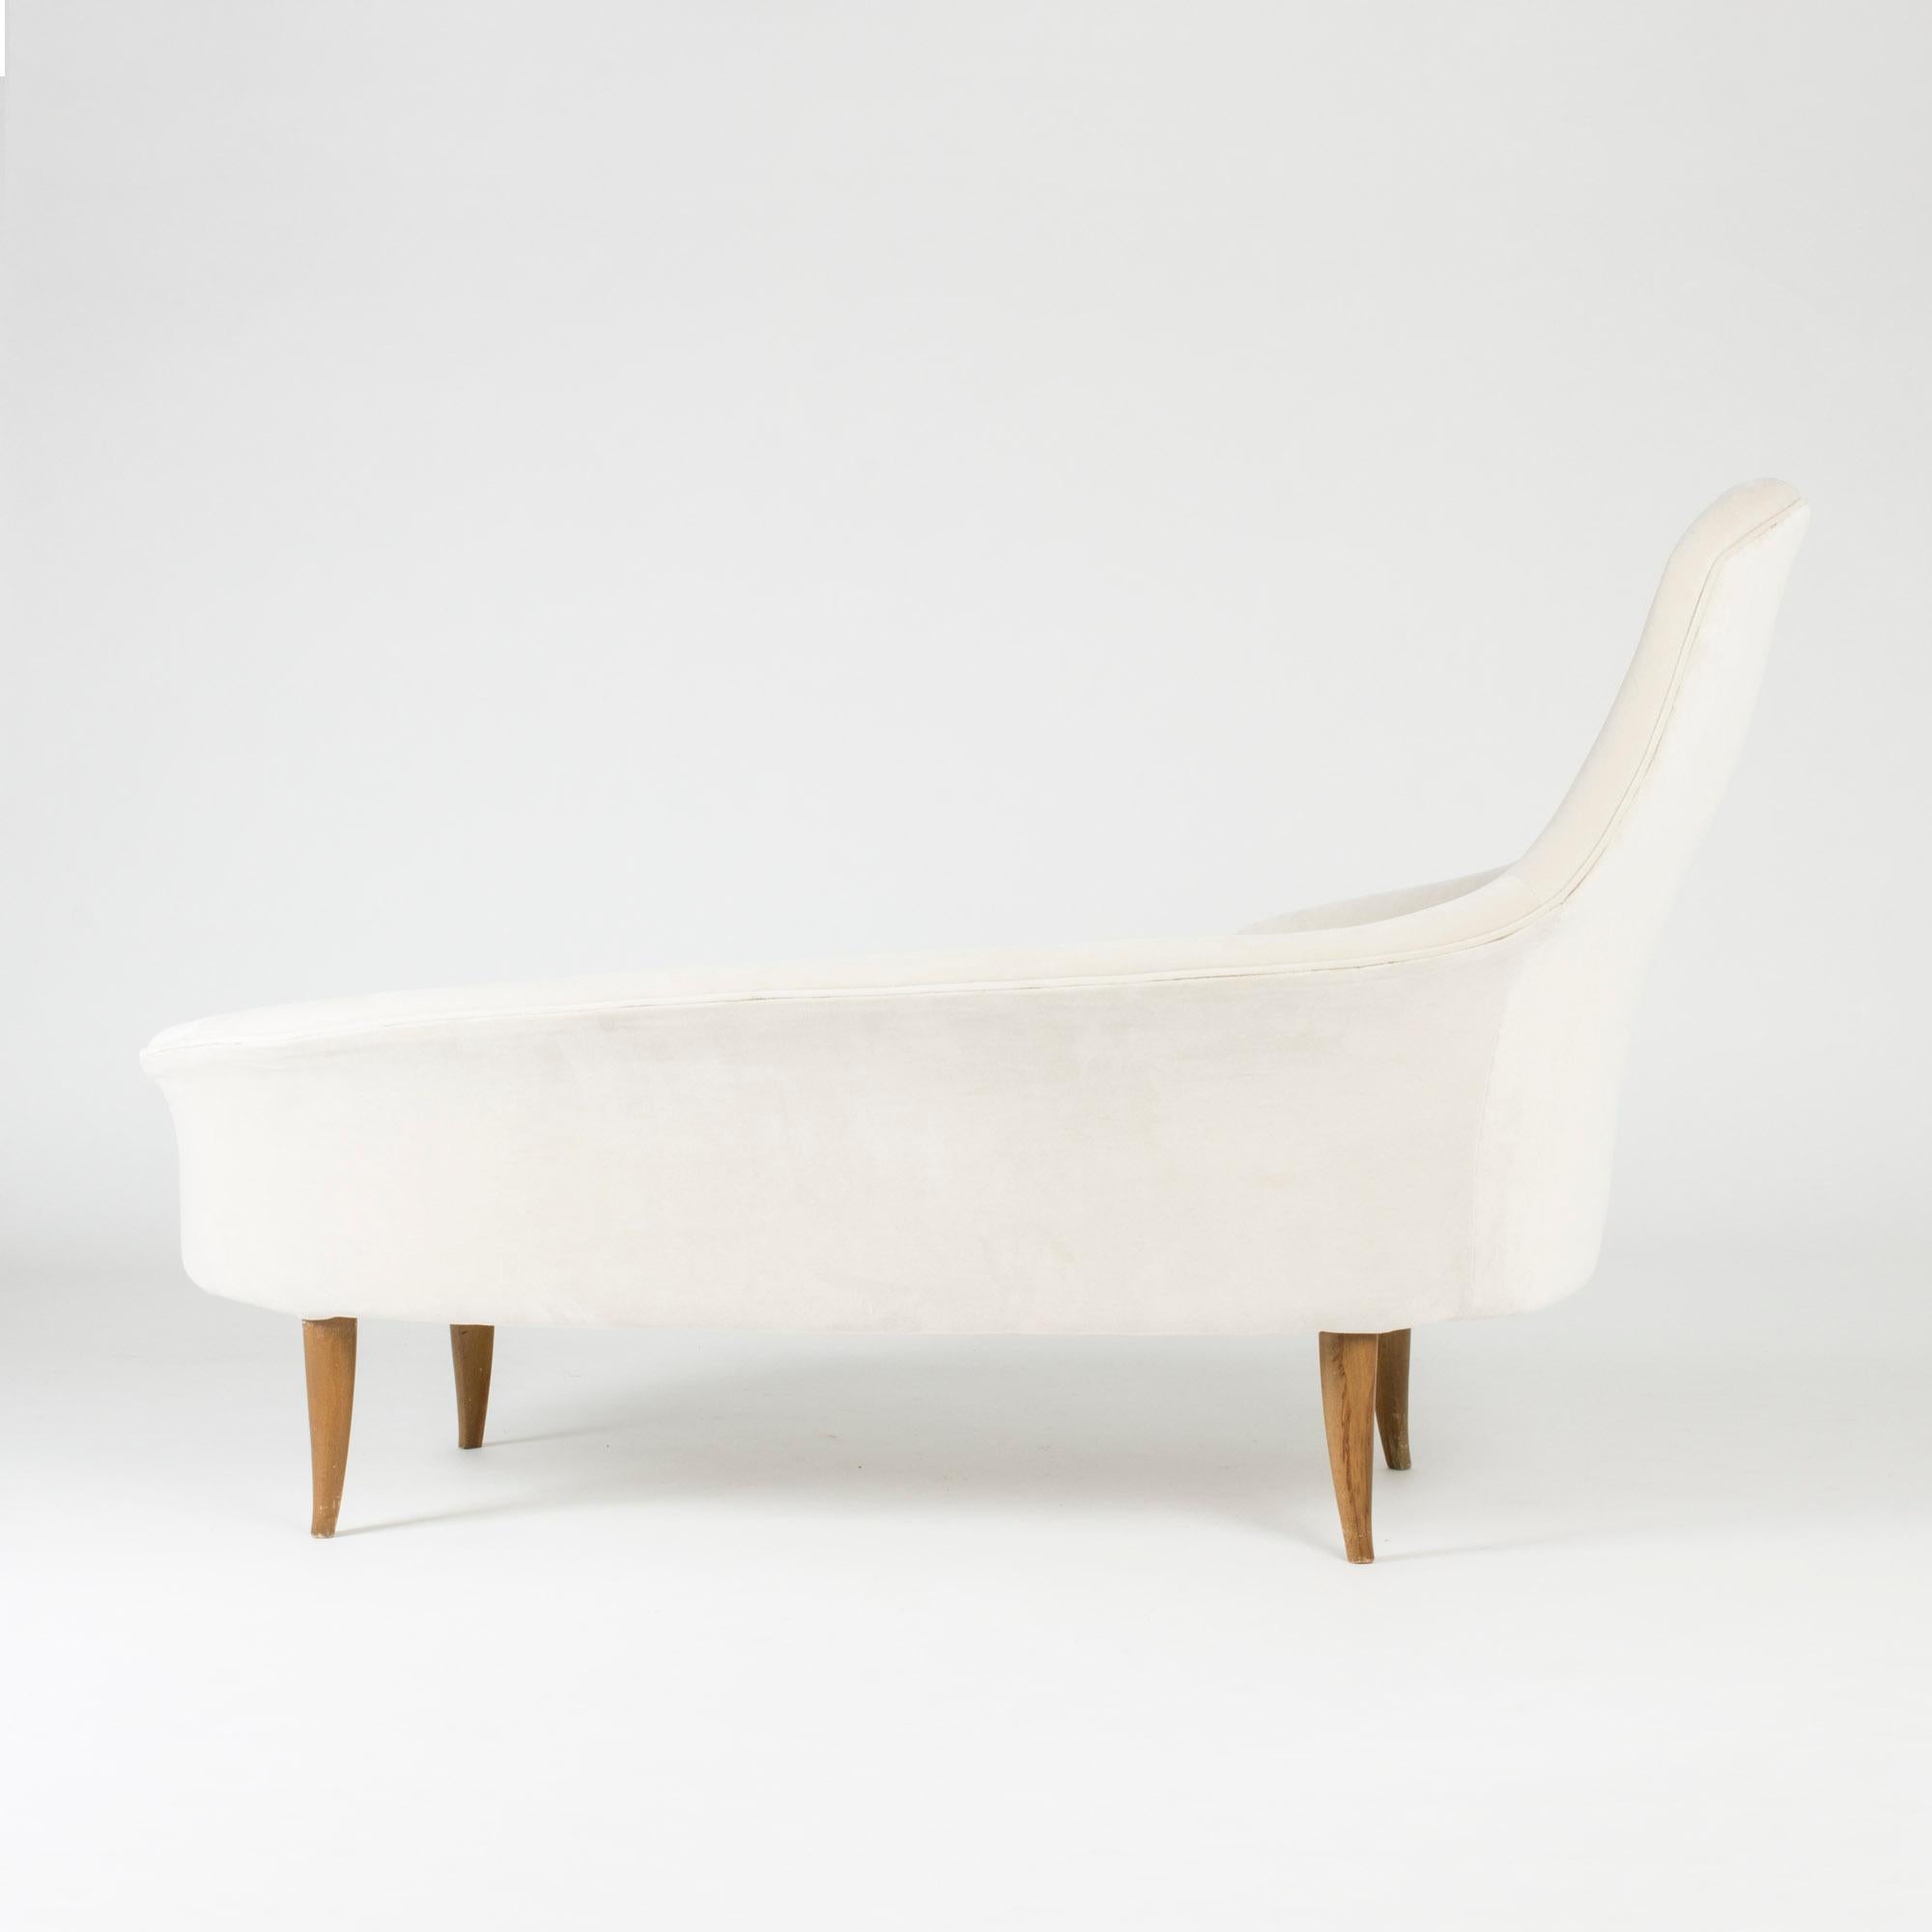 Stunning “Garden of Eden” chaise longue by Kerstin Hörlin-Holmqvist, upholstered in eggshell white velvet. Beautiful design that strikes a perfect balance between modernism and tradition.